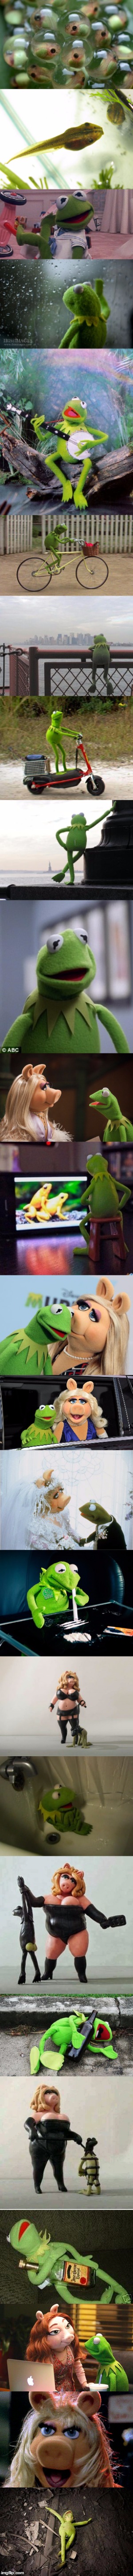 The Rise and Fall of Kermit | image tagged in memes,kermit the frog,miss piggy | made w/ Imgflip meme maker